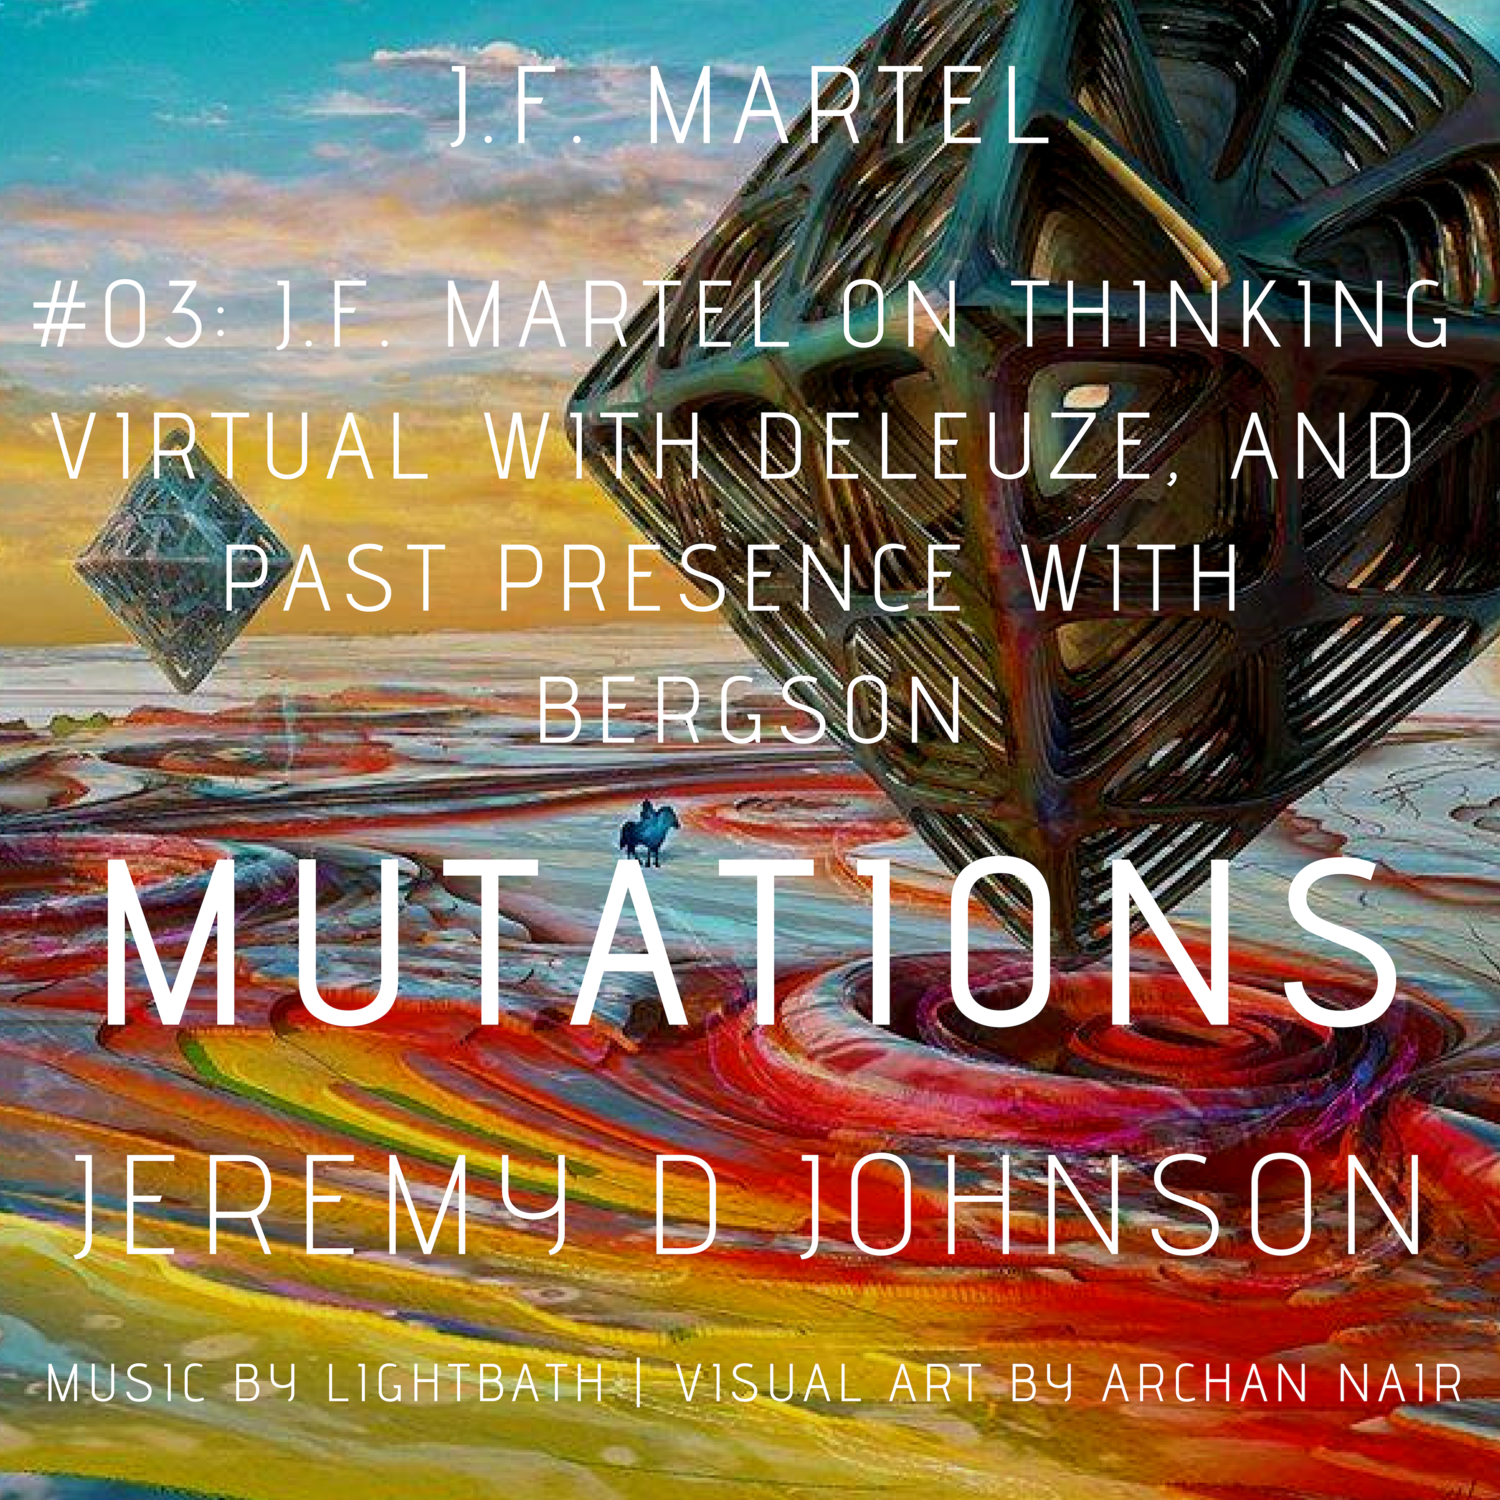 #03 J.F. Martel on Thinking Virtual with Deleuze and Past Presence with Bergson